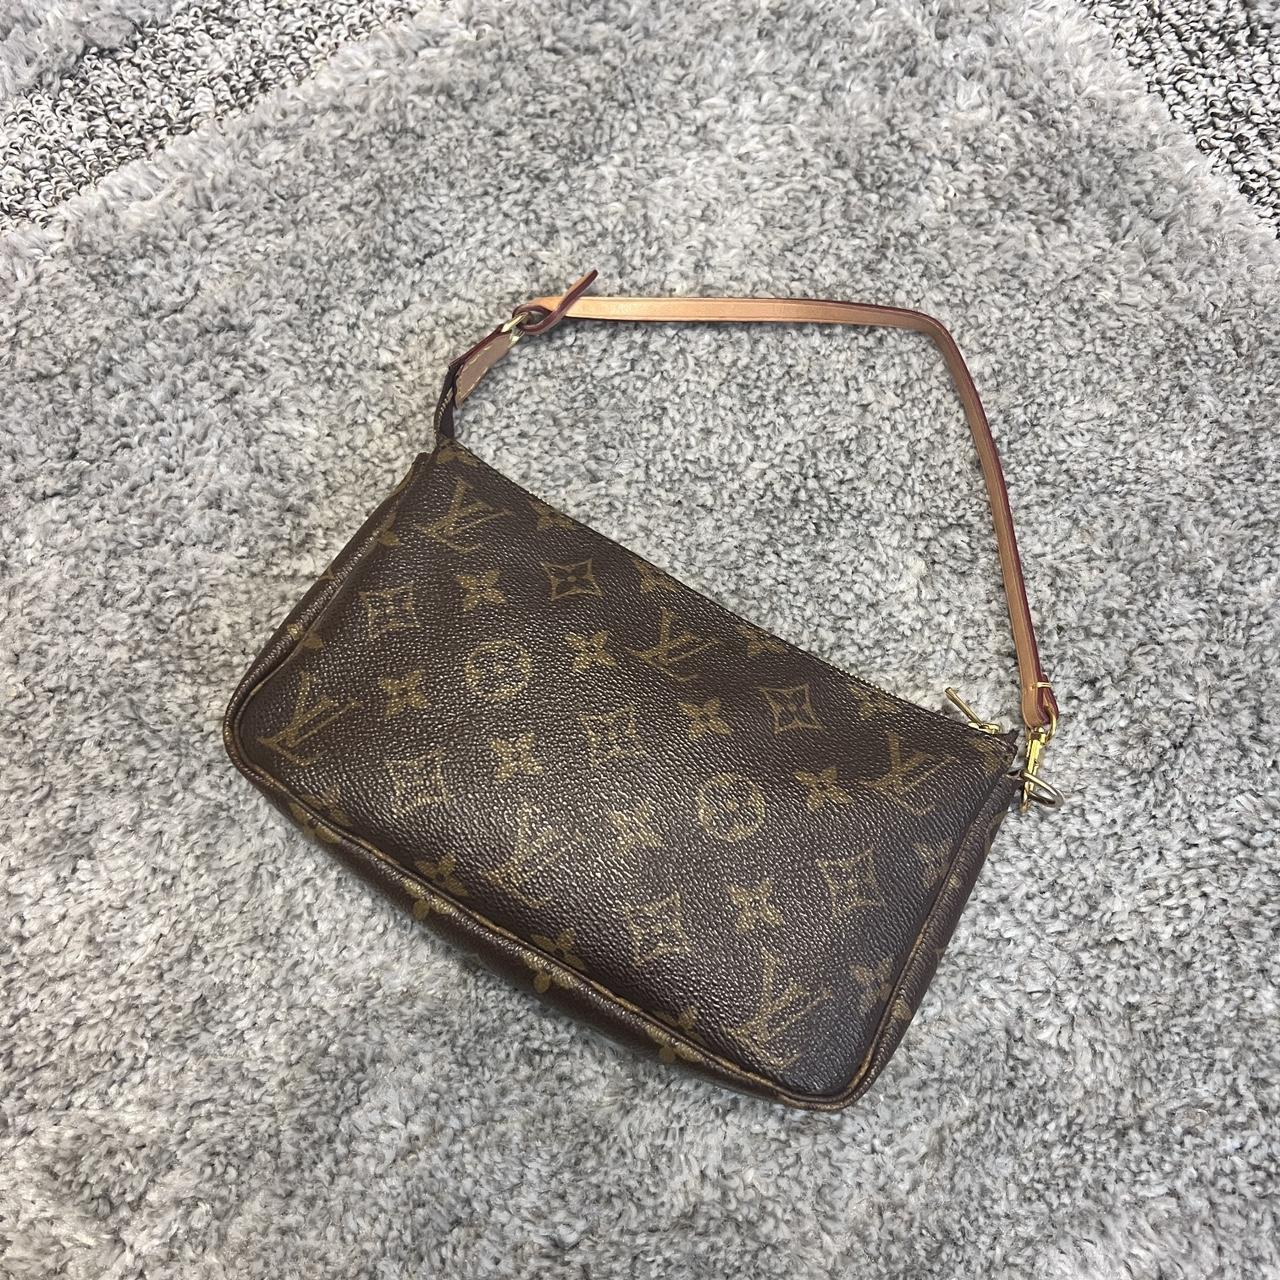 Louise Vuitton Louise Nude chain bag in immaculate - Depop